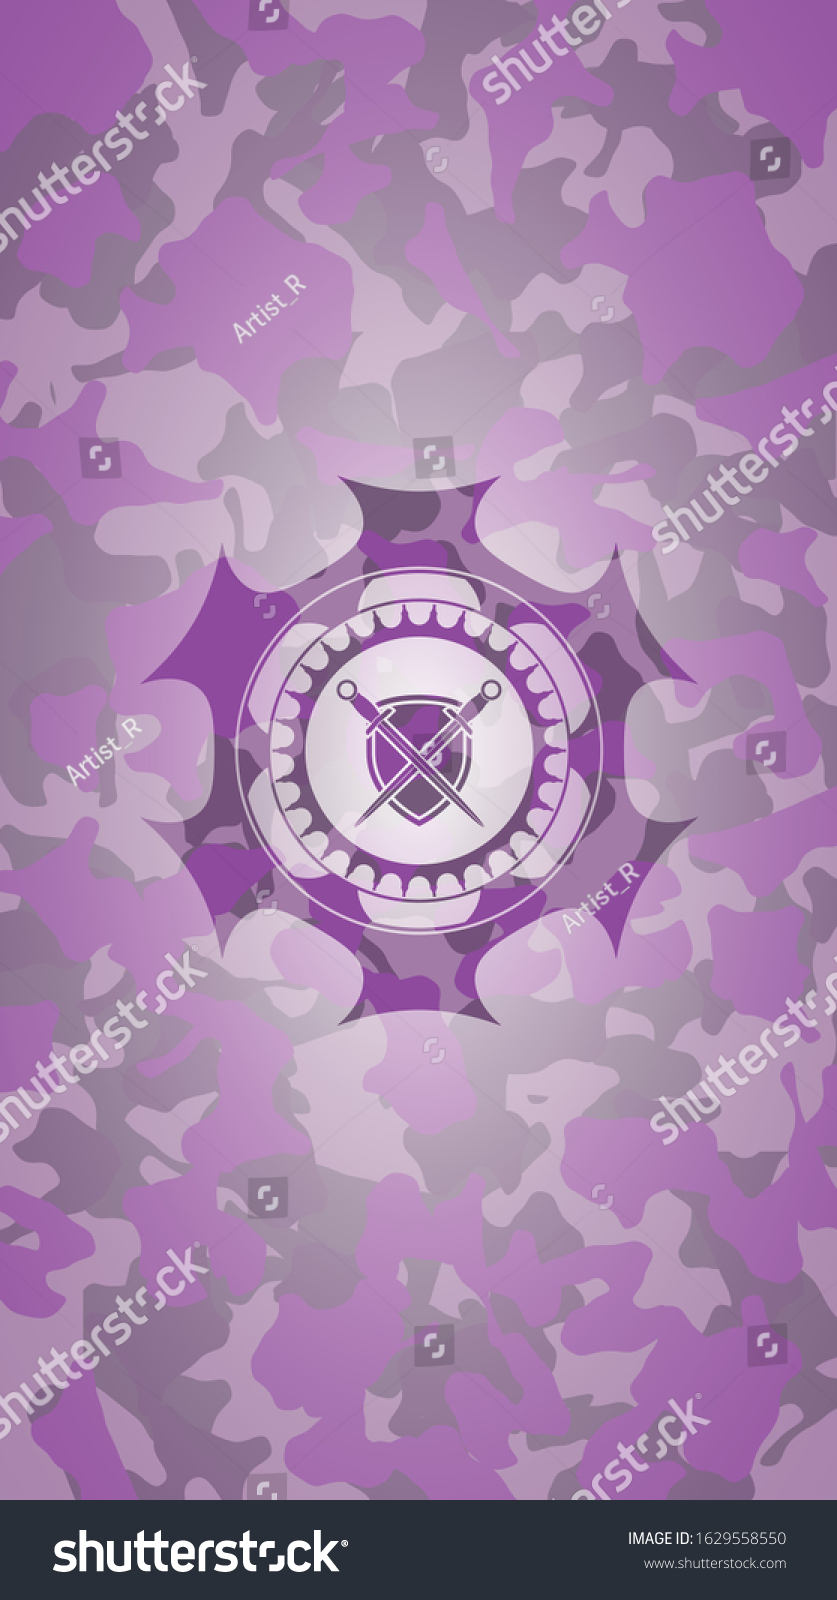 swords crossed with shield icon inside pink and purple camo texture #1629558550